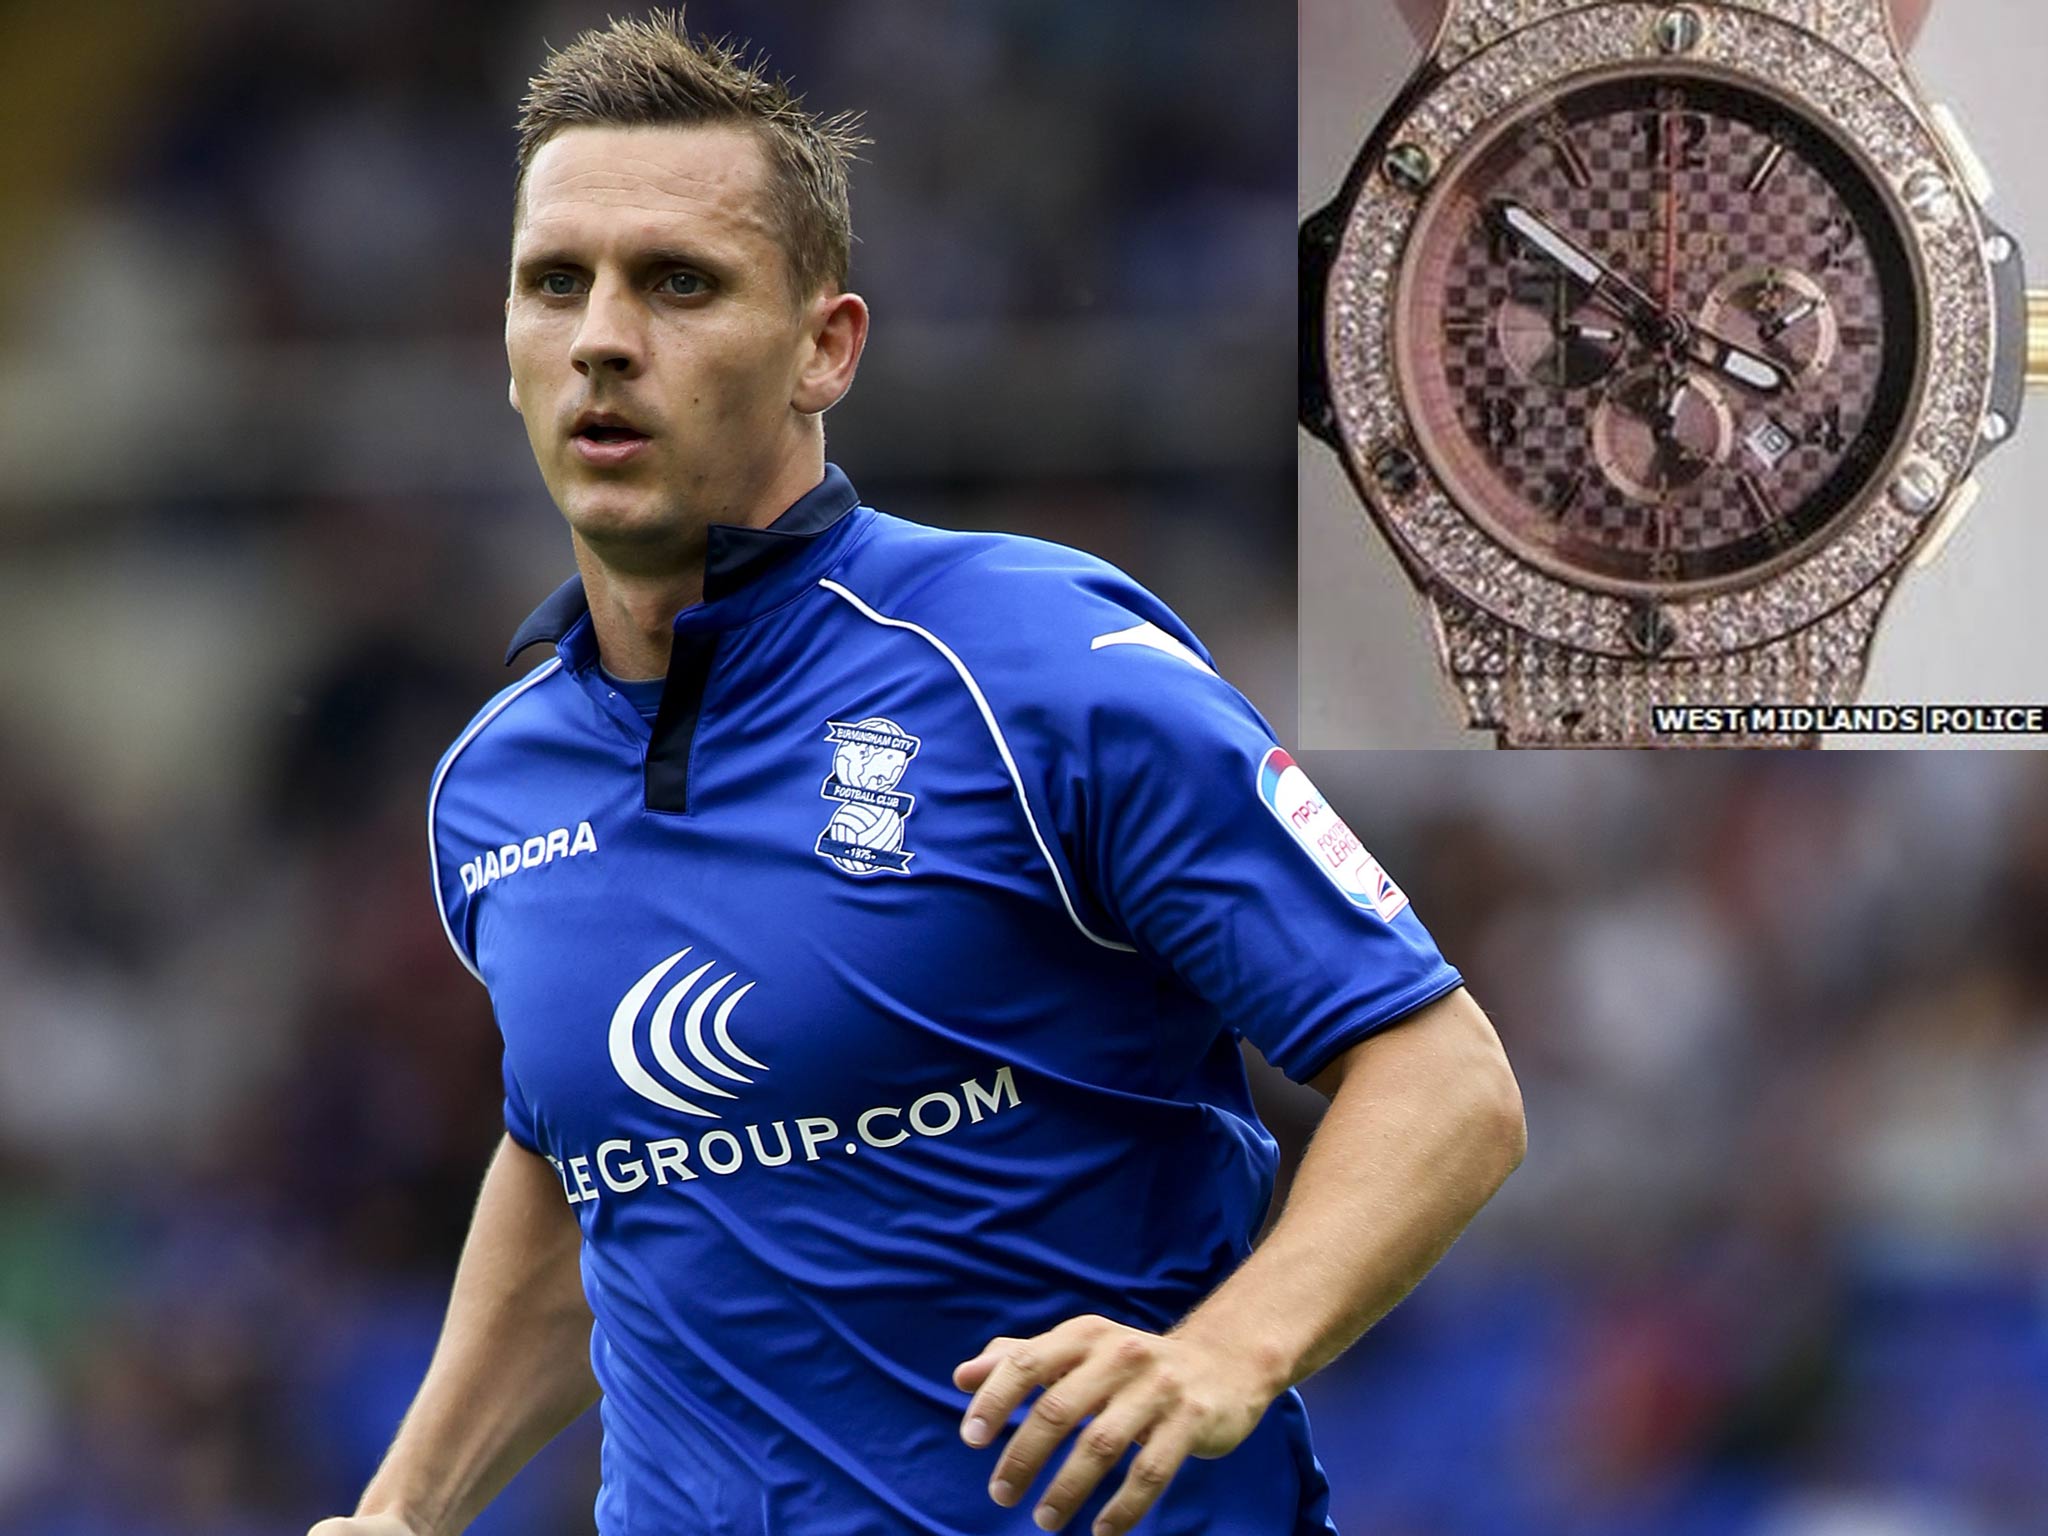 Peter Lovenkrands, plus inset, an image released by West Midlands police of a similar diamond-encrusted Hublot watch